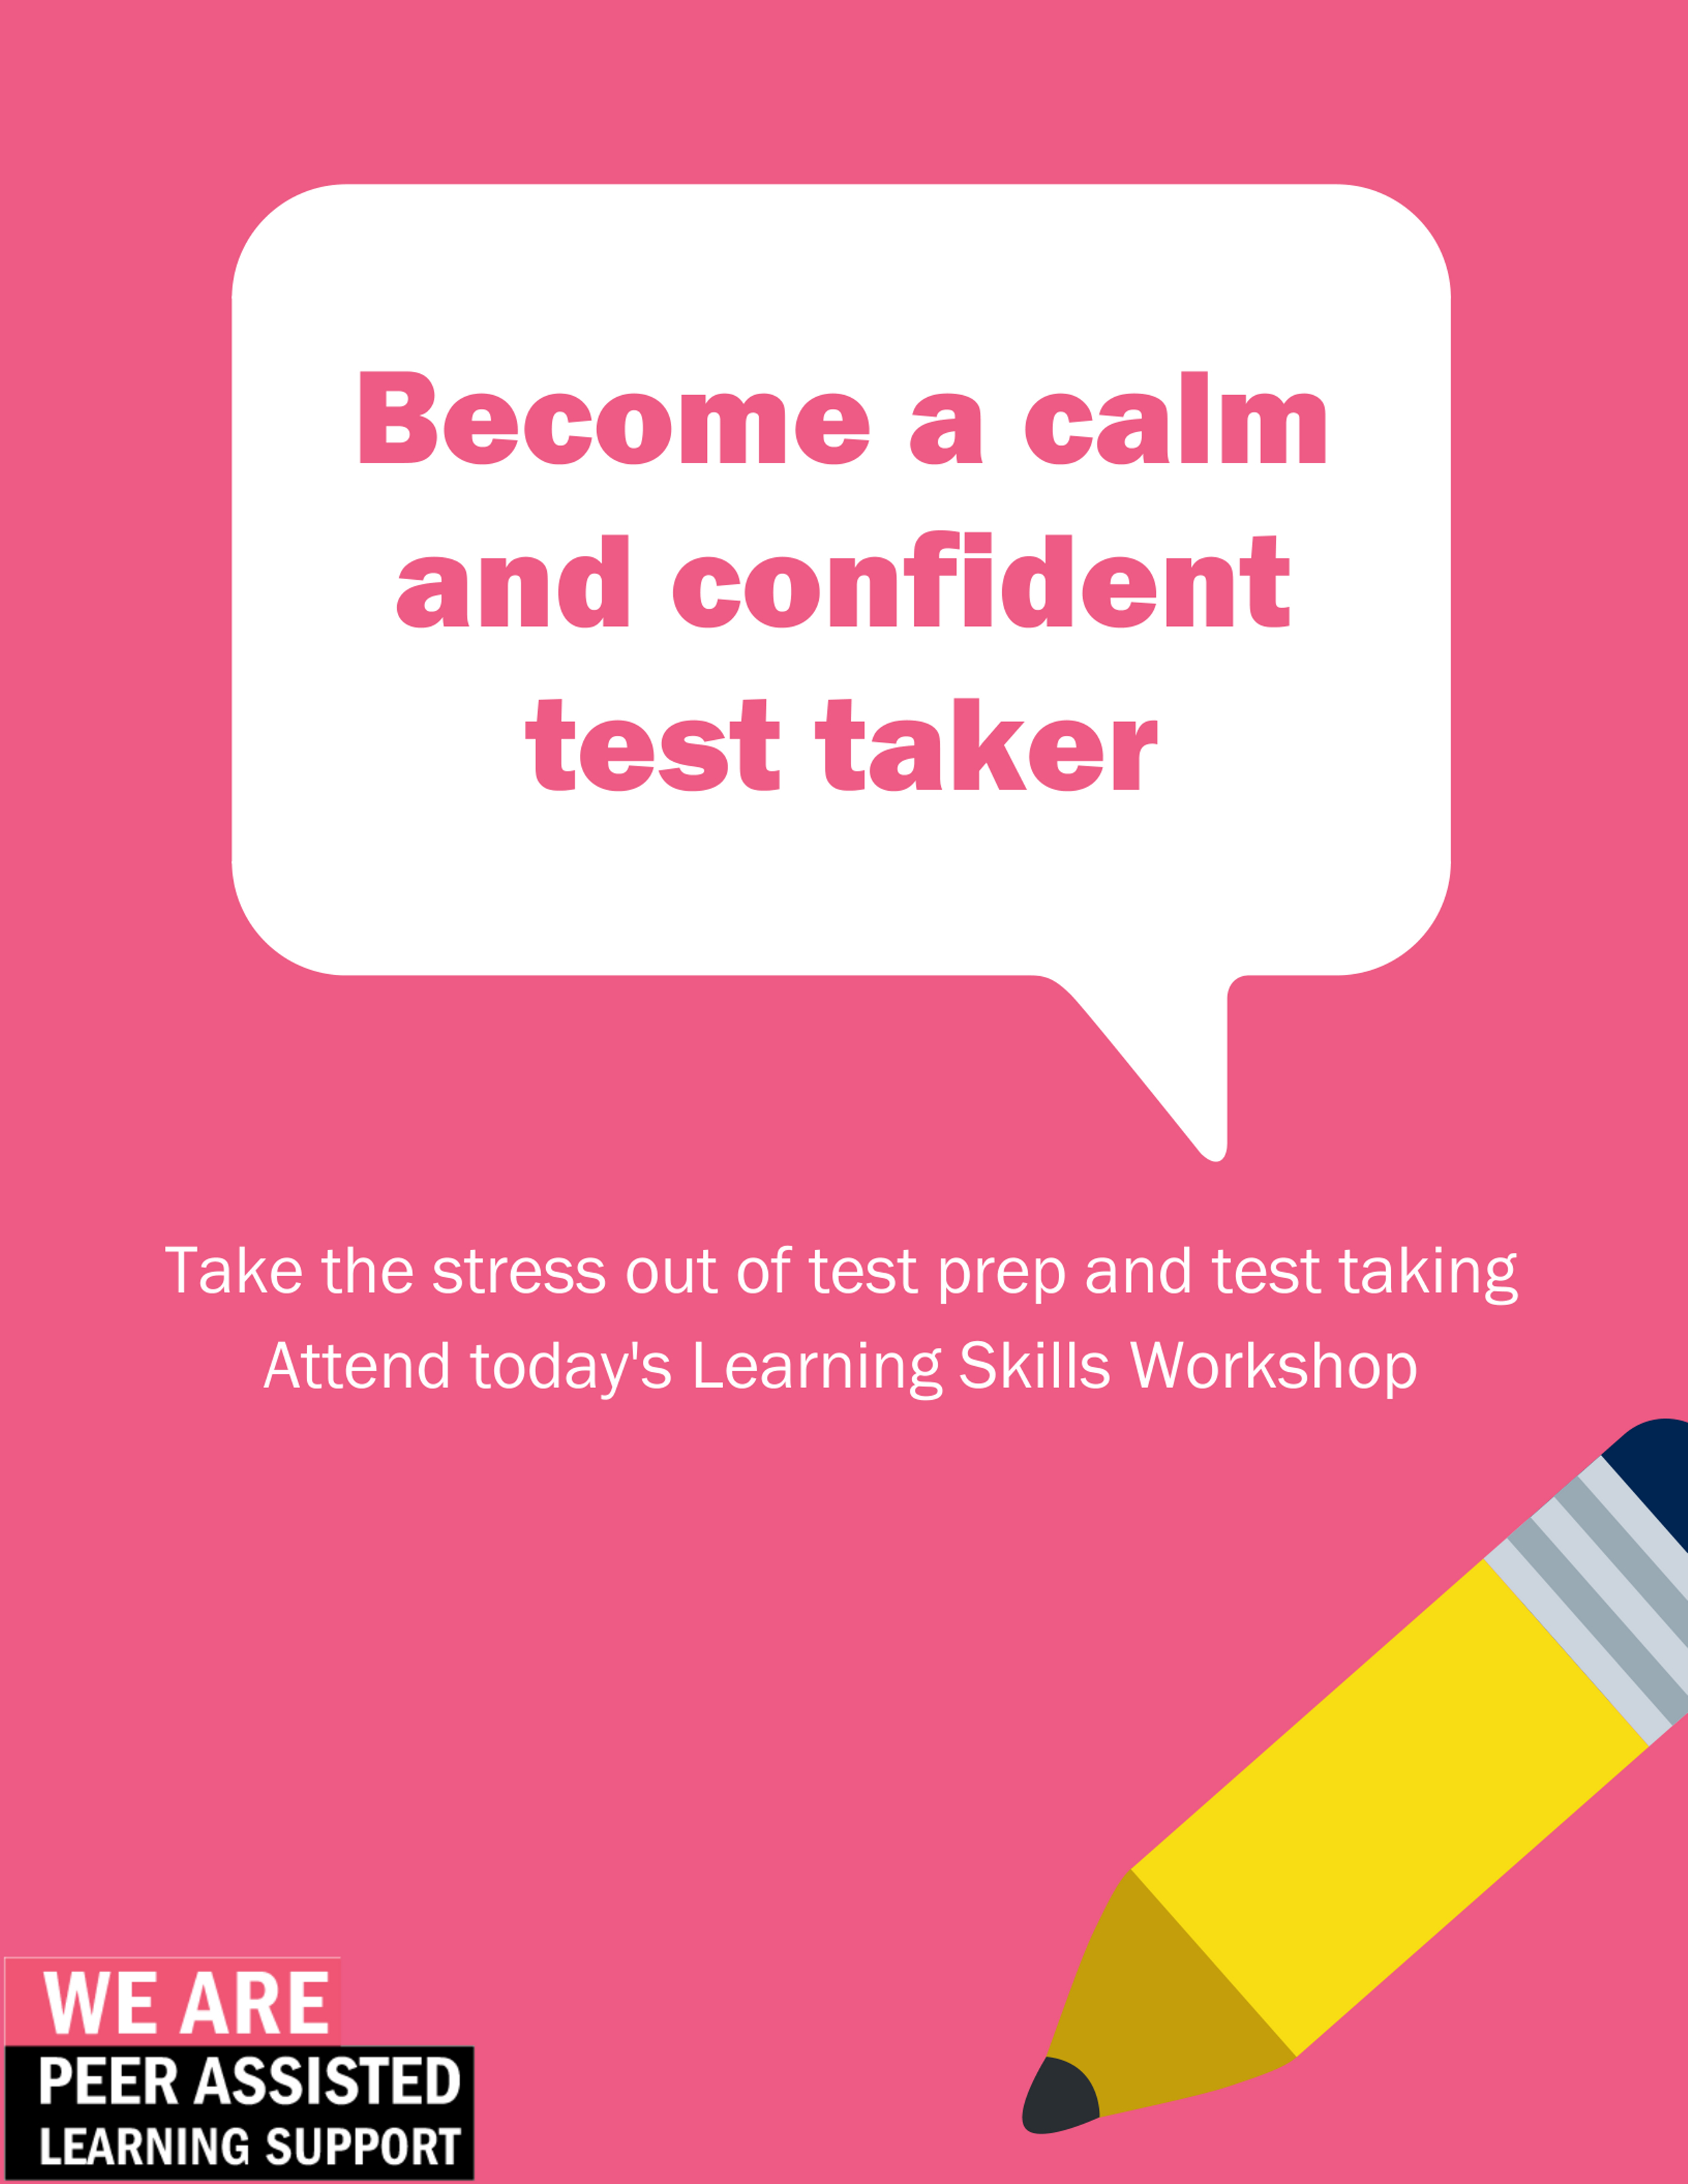 Cartoon image of pencil with the text "Become a calm and confident test-taker"